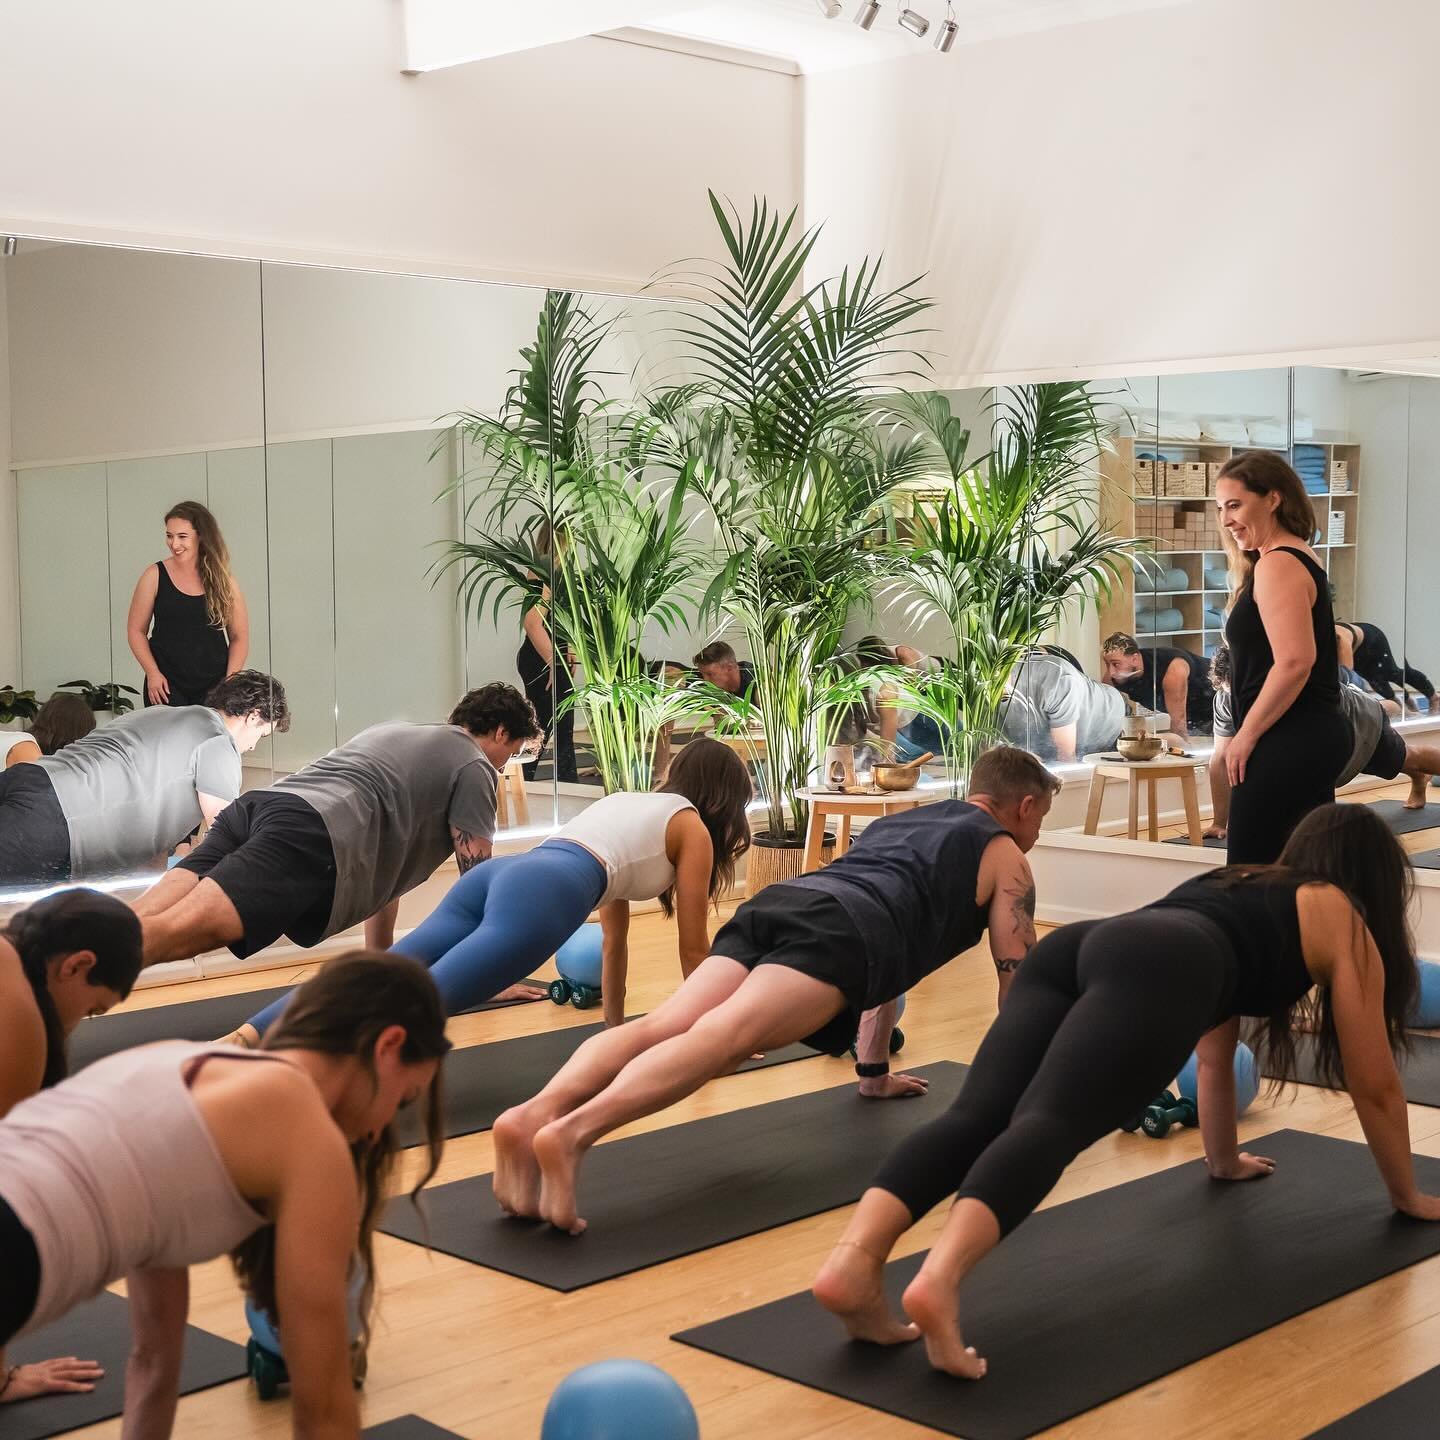 Join our wonderful Chelsea for Mat Pilates tomorrow morning, 7am-7:45am 🌞

(Remember those of you doing the challenge, our weekday morning classes are worth double points!)